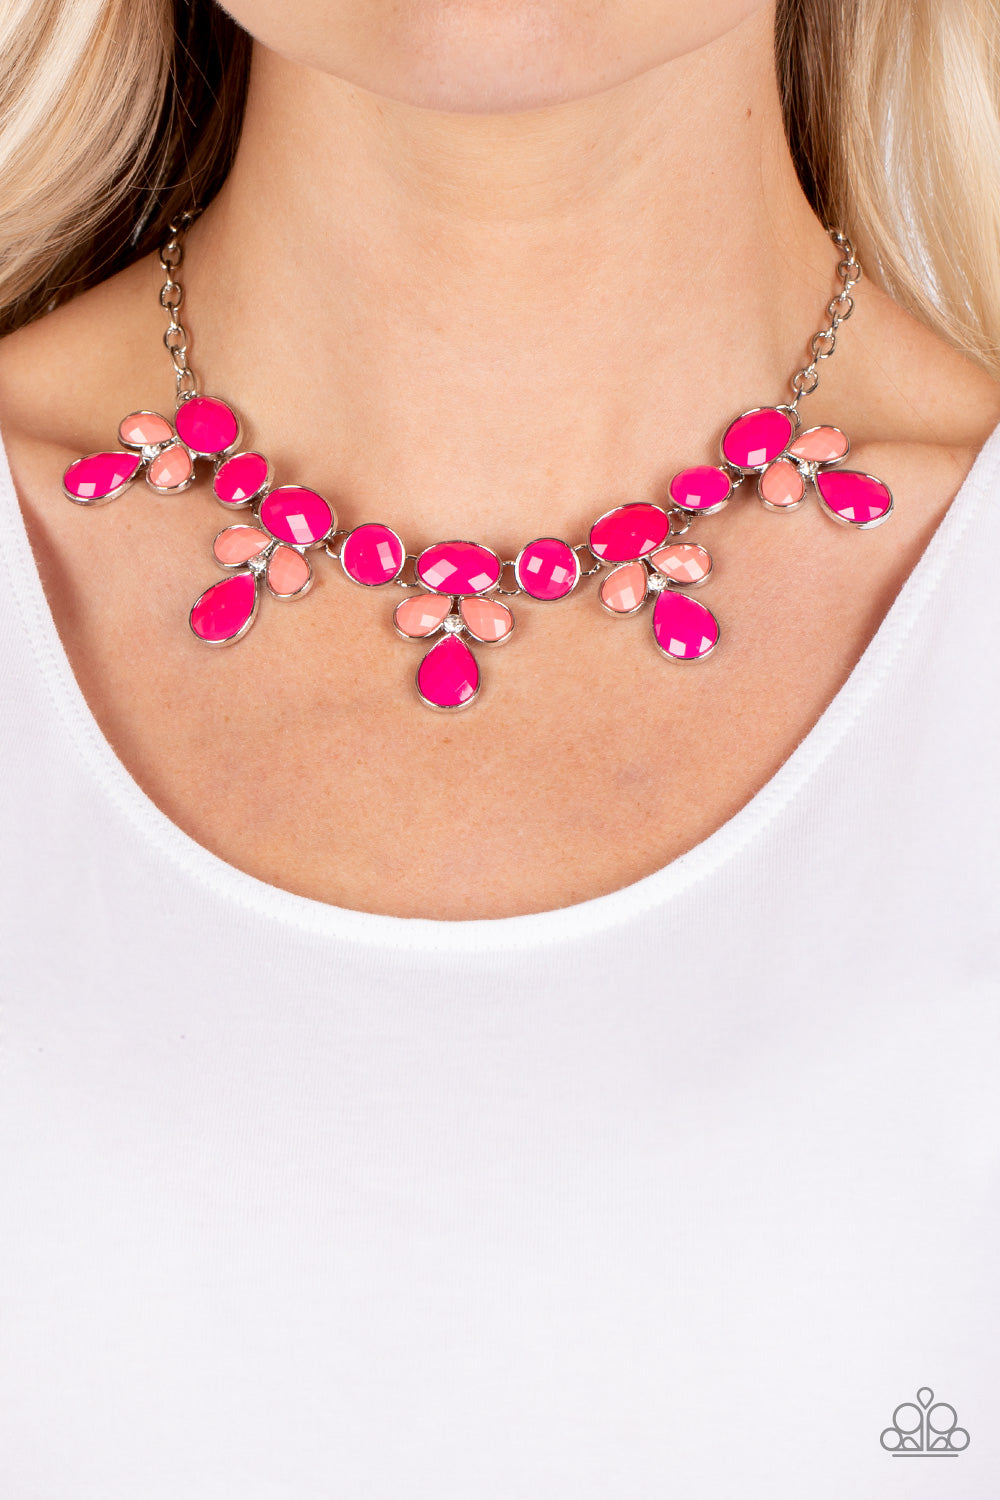 Midsummer Meadow - pink - Paparazzi necklace